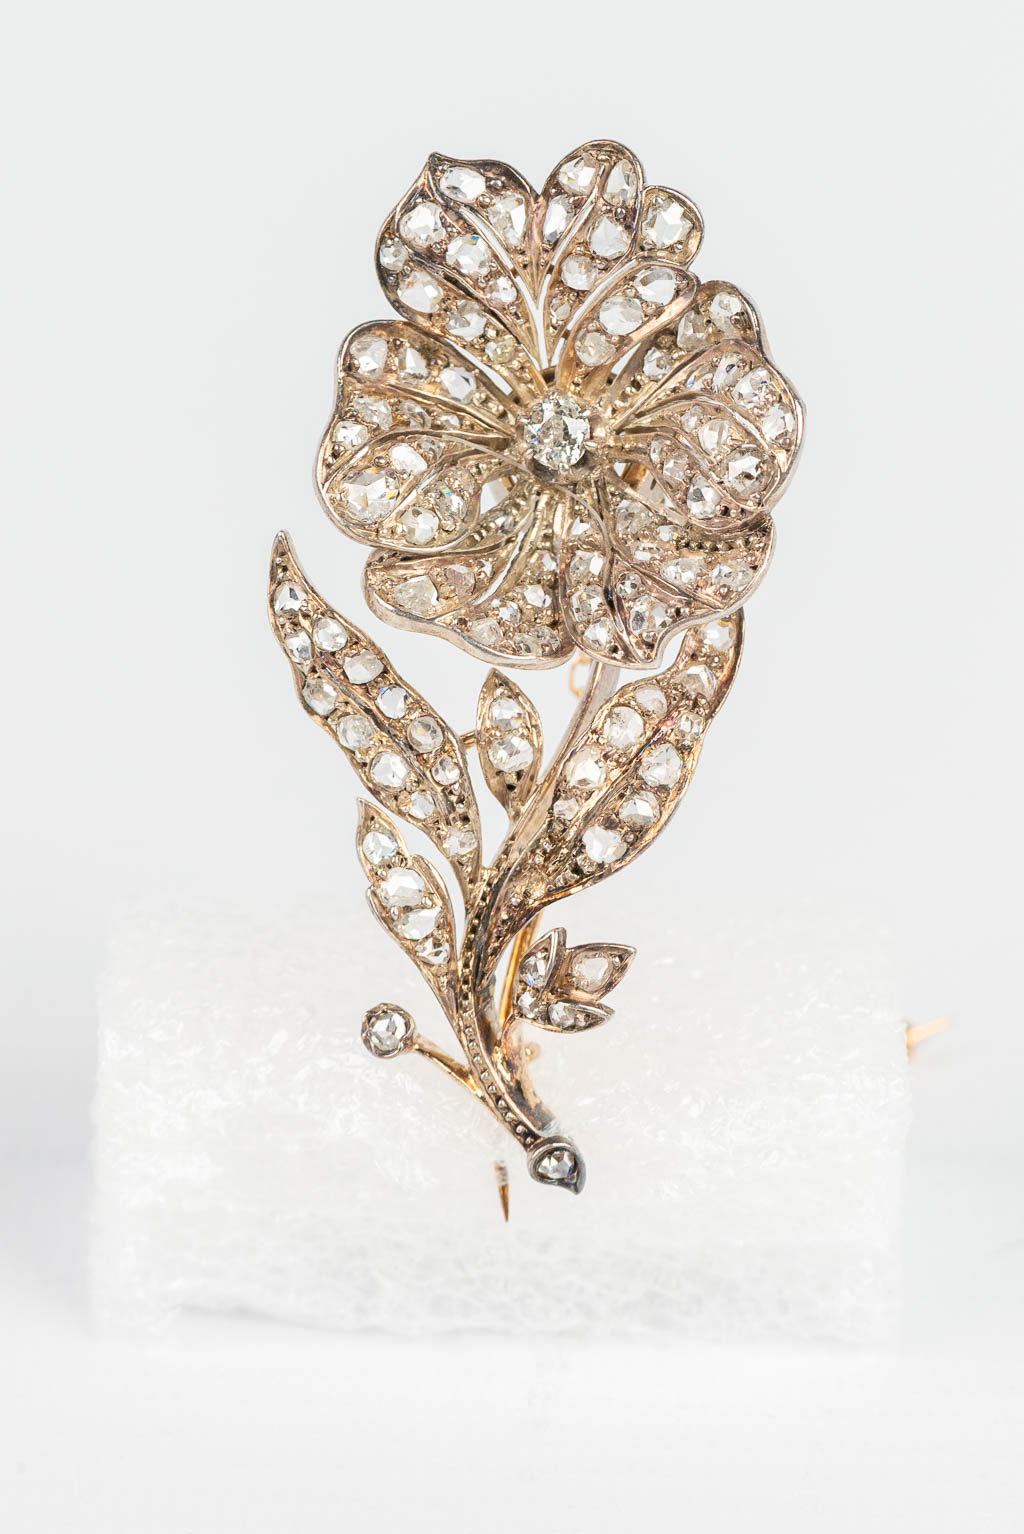 An exceptional and antique brooch 'Bijoux Trembleuse' made of white gold. Napoleon 3 period, 19th century. (H:5,5cm)